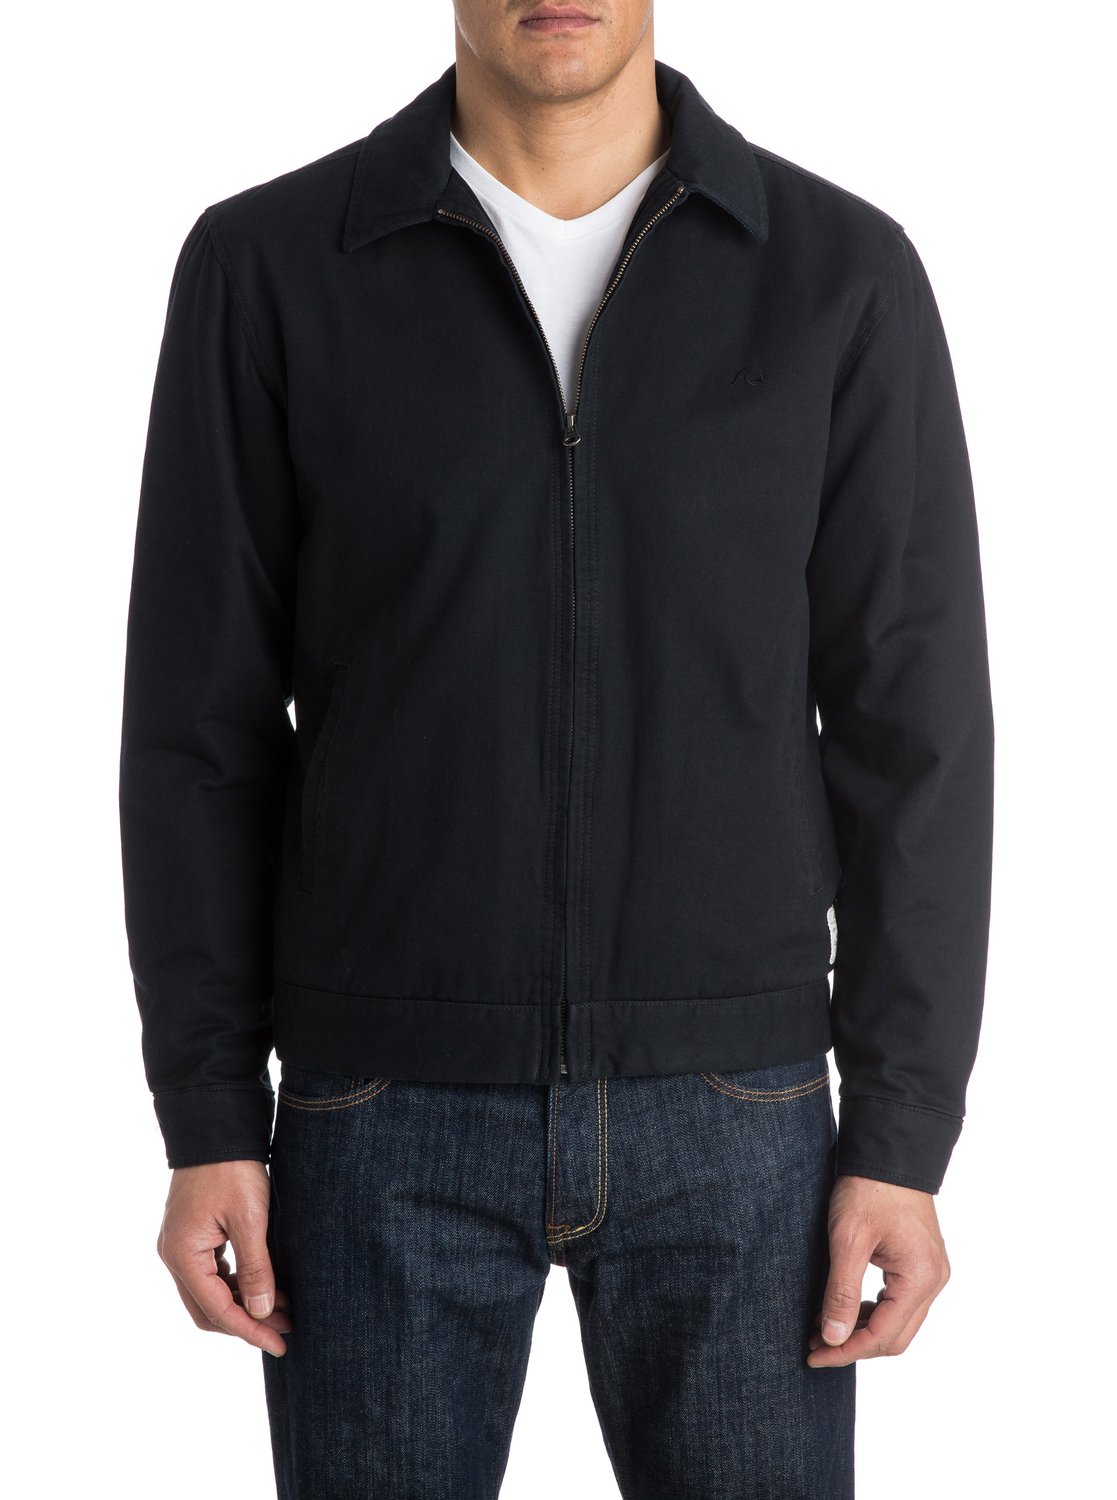 Quiksilver™ Billy Classic Surf Jacket for Men EQYJK03110